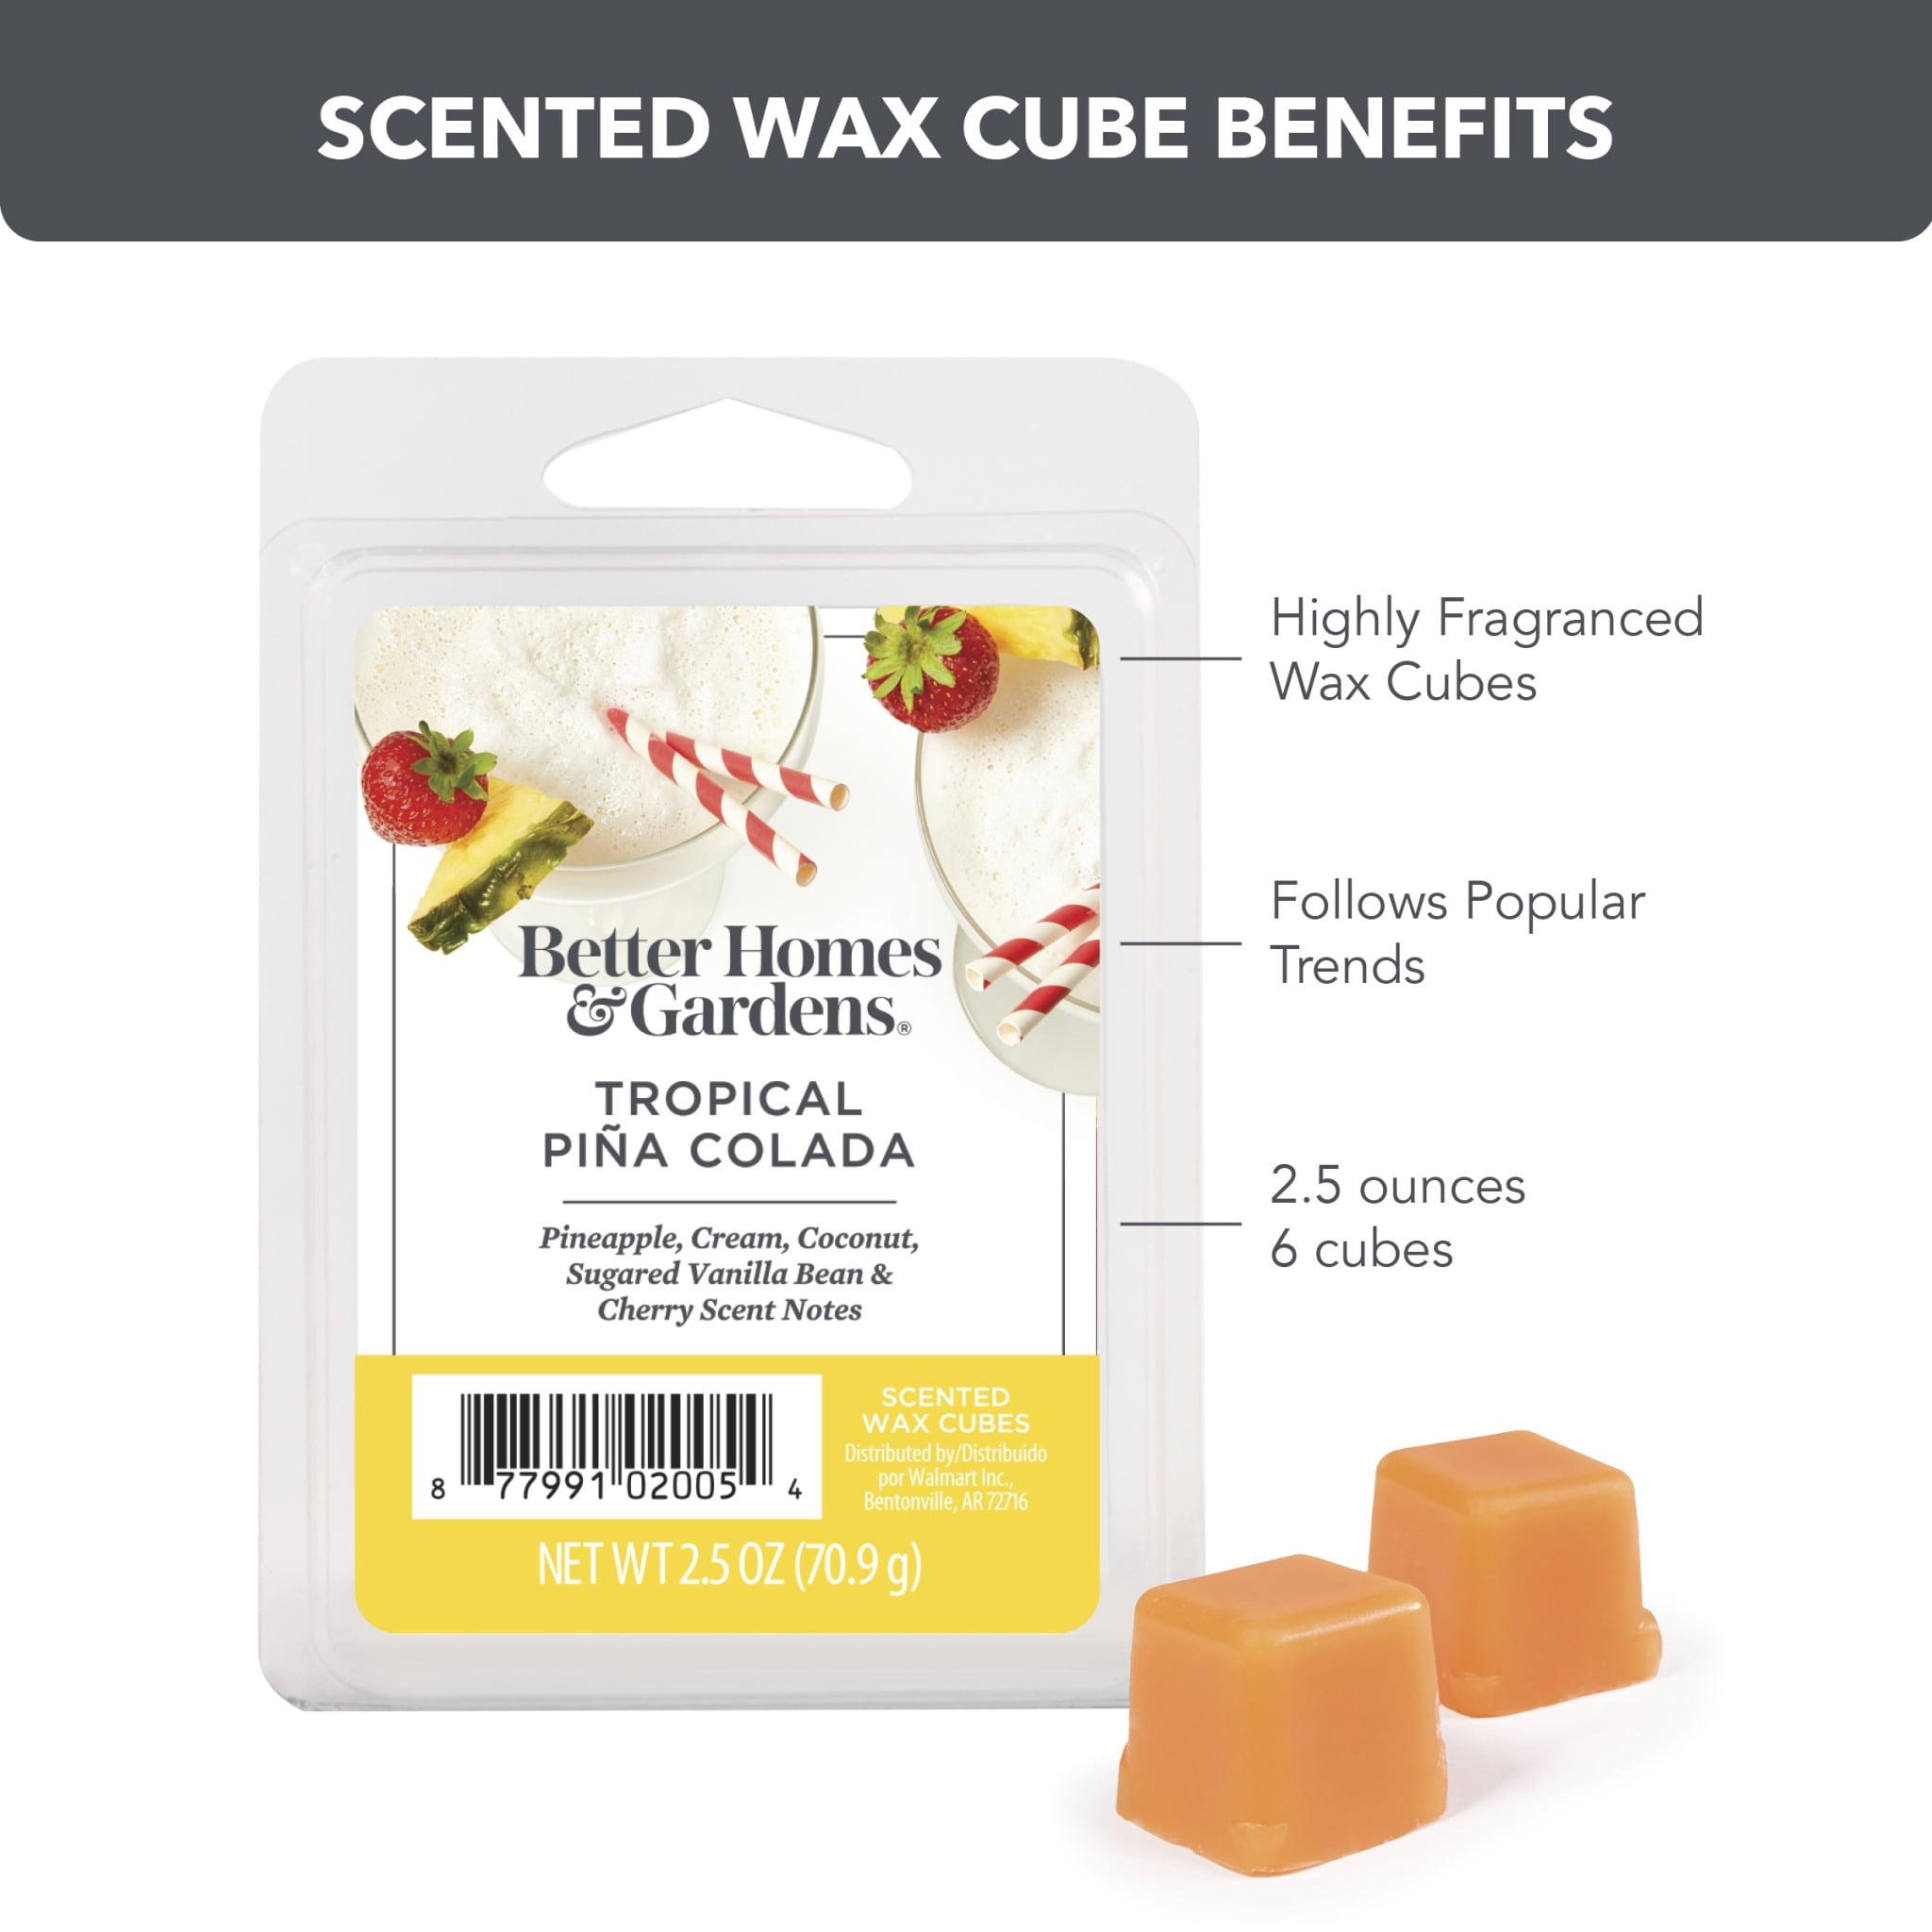 Tropical Island Paradise Wax Melt - Long-Lasting Aroma with Pineapple,  Coconut and Vanilla Scent - Perfect for Summer Parties and Relaxation. –  Goose Creek Candle